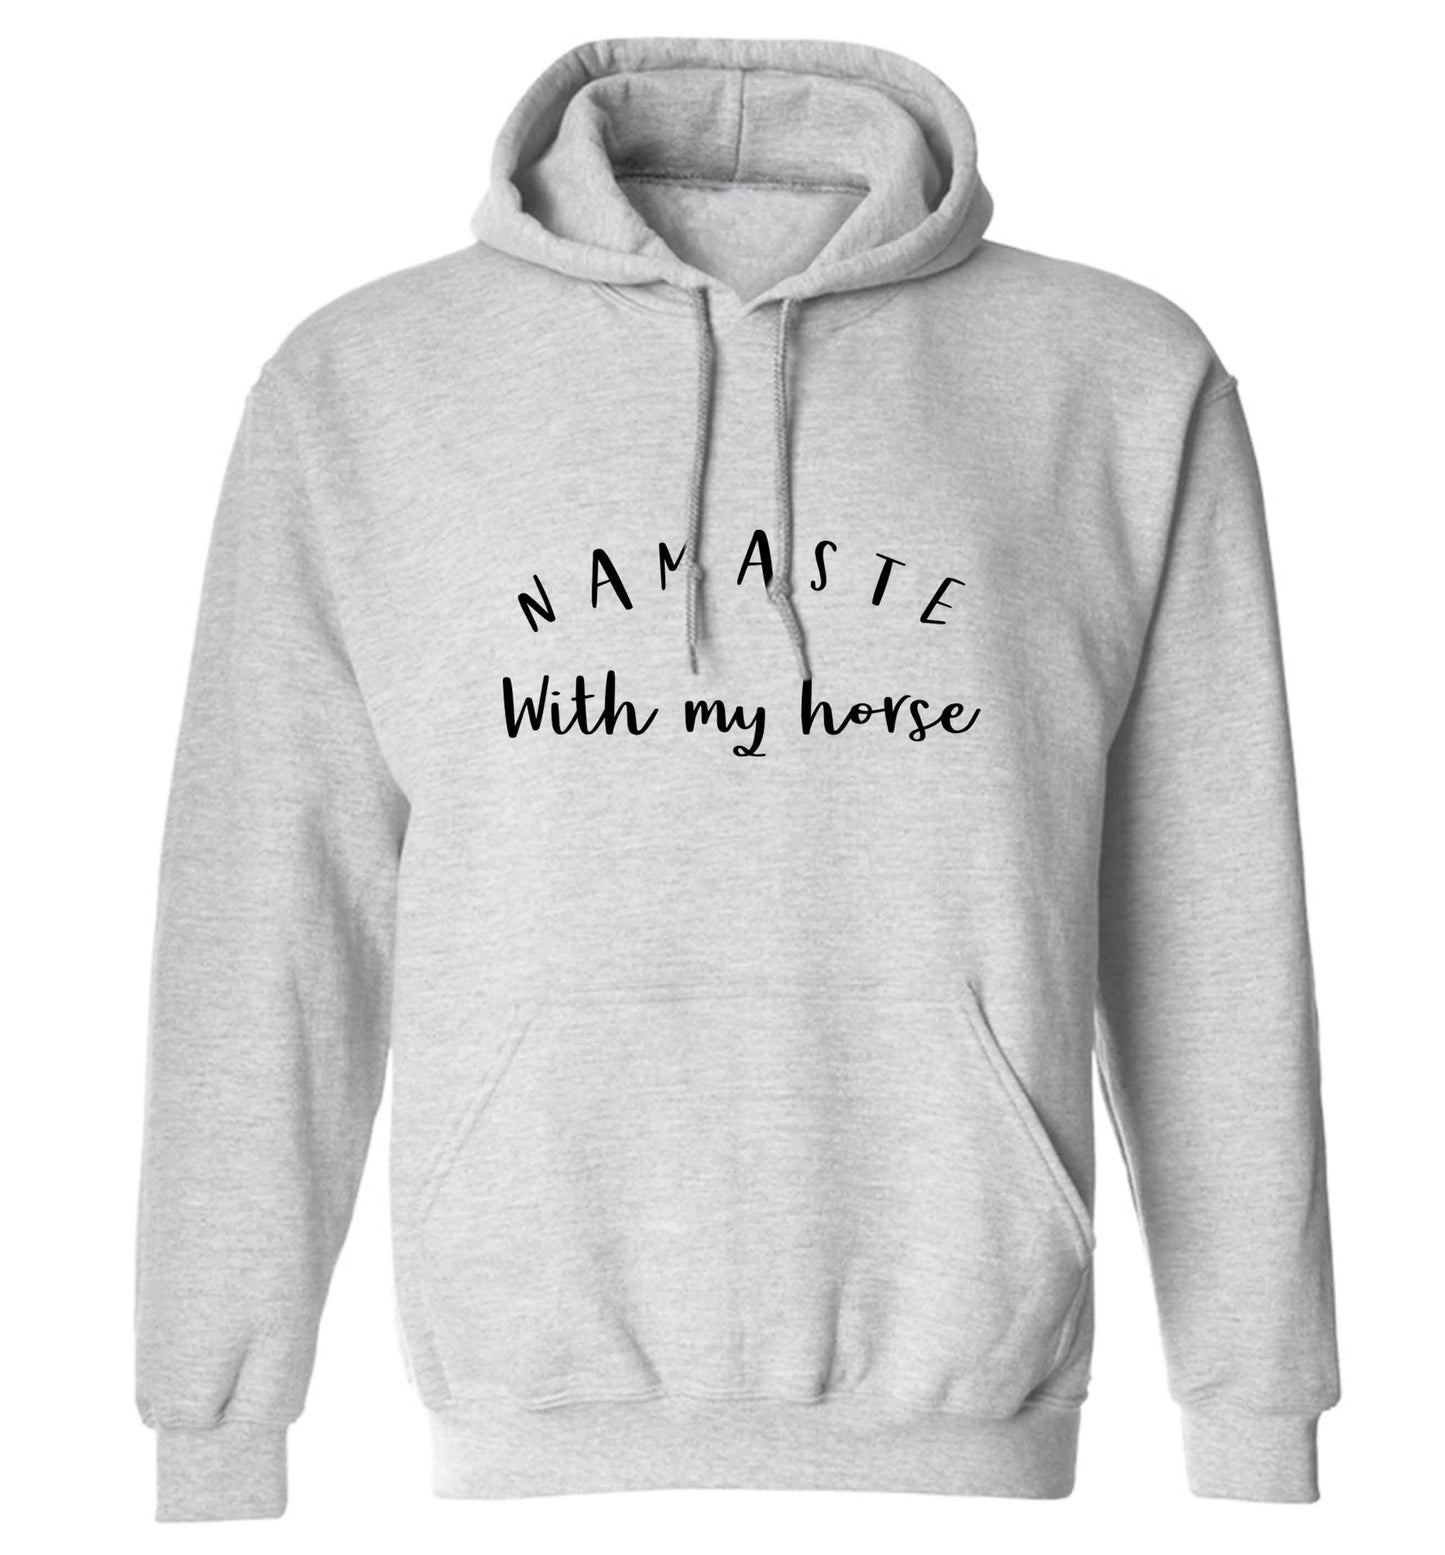 Namaste with my horse adults unisex grey hoodie 2XL